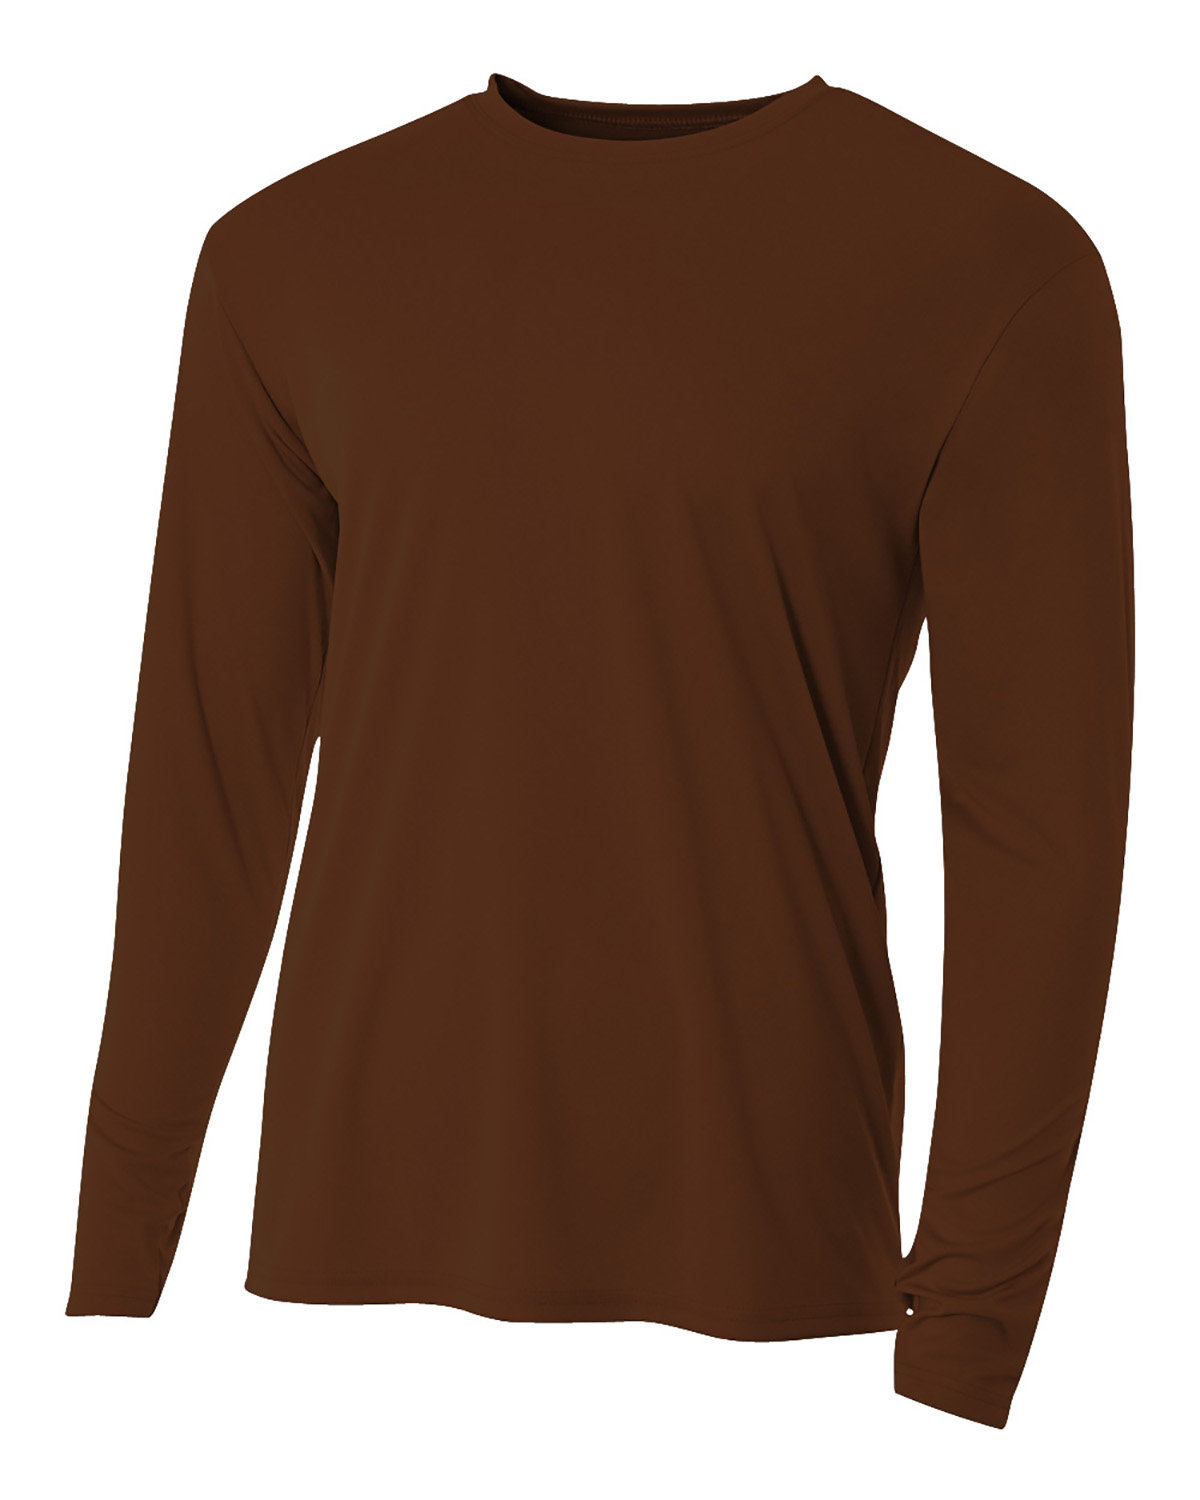 A4 Men's Cooling Performance Long Sleeve T-Shirt BROWN 